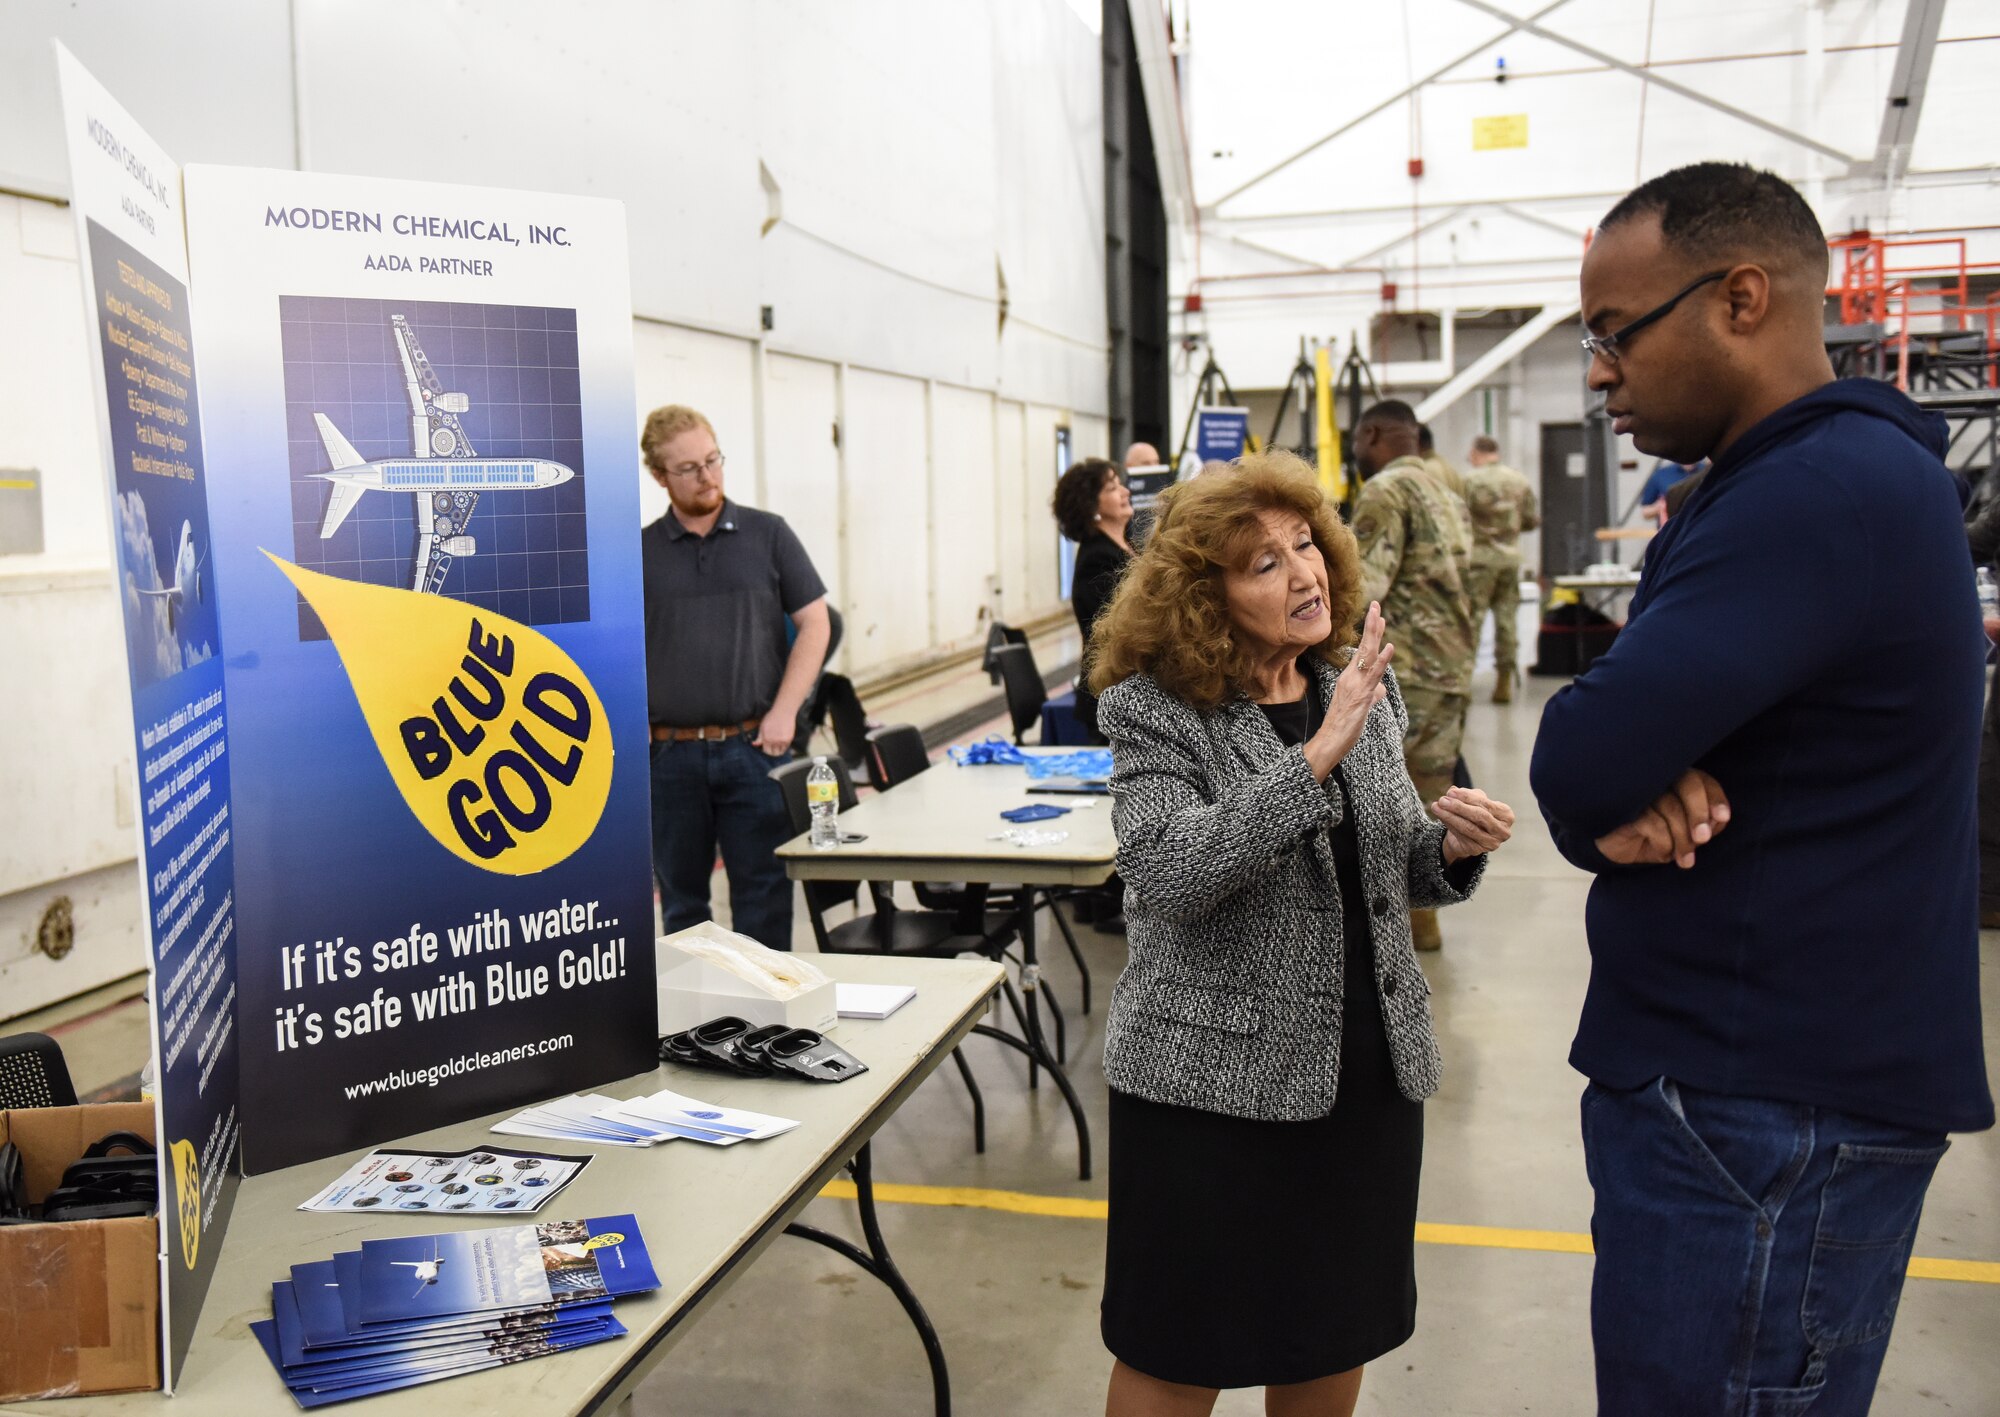 Community and Guardsmen build aviation and defense workforce